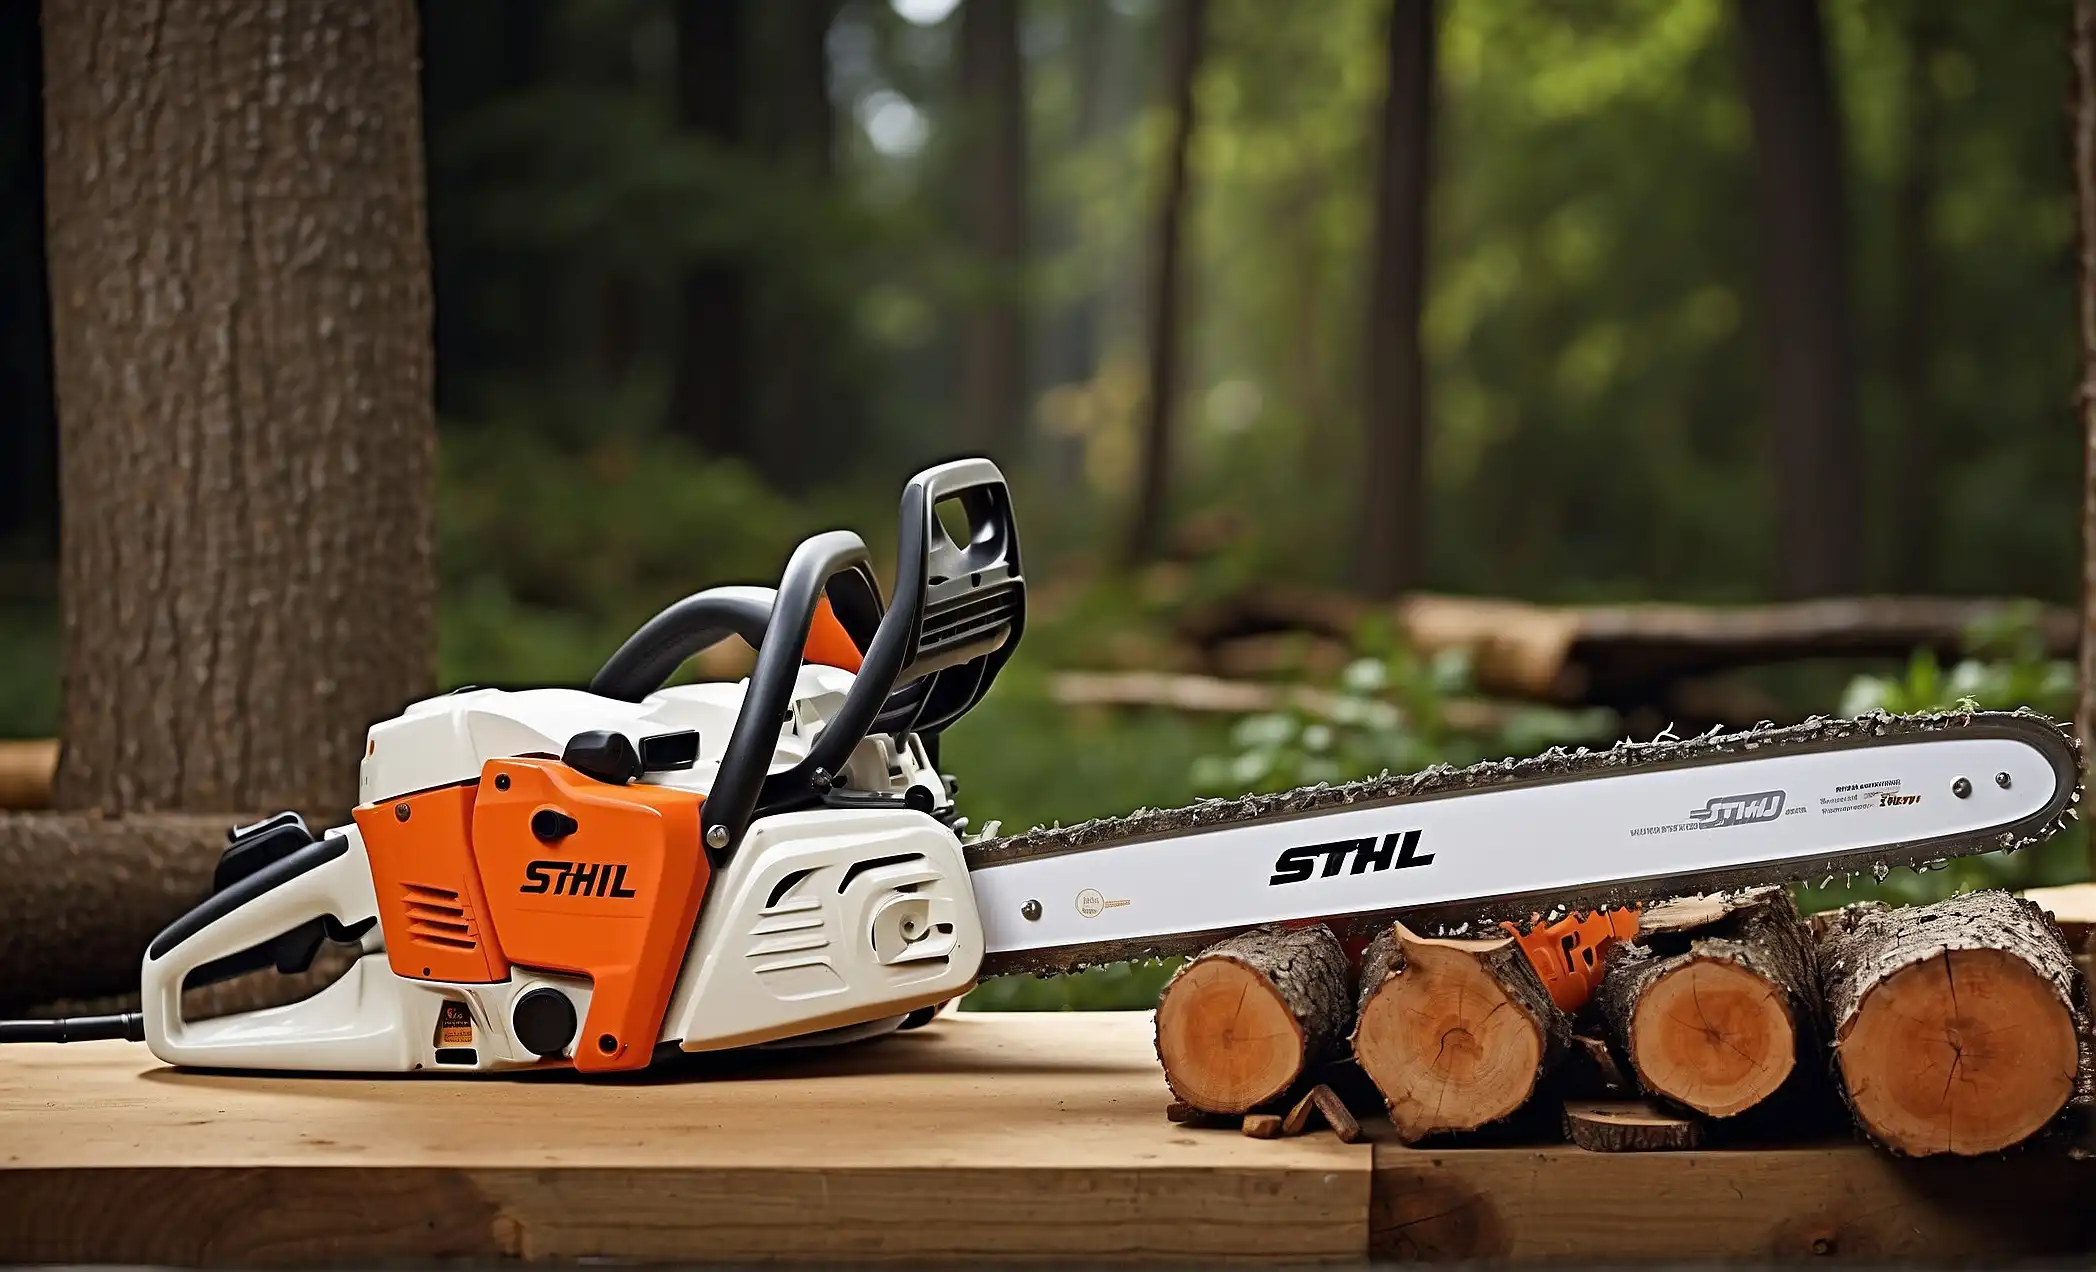 Stihl 260 Vs 261: What You Need to Know